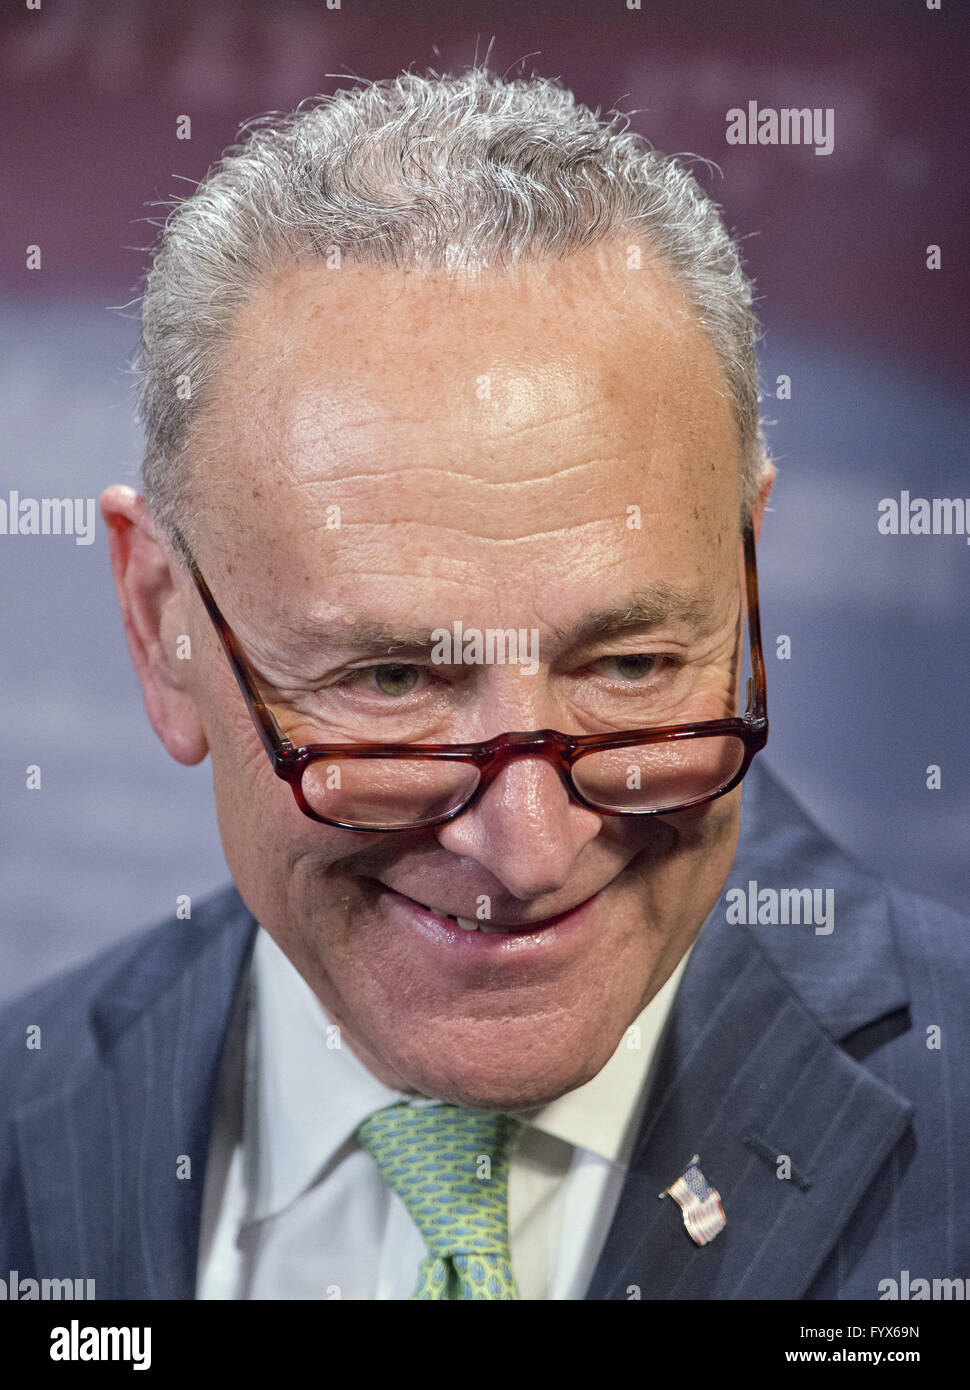 Washington, District of Columbia, USA. 28th Apr, 2016. United States Senator Chuck Schumer (Democrat of New York) appears at a press conference calling on the US Senate Republican leadership to bring to the floor the bipartisan Sentencing Reform and Corrections Act, a bill to reduce some mandatory minimum sentences and apply those changes retroactively to inmates currently serving unfair sentences.Credit: Ron Sachs/CNP Credit:  Ron Sachs/CNP/ZUMA Wire/Alamy Live News Stock Photo